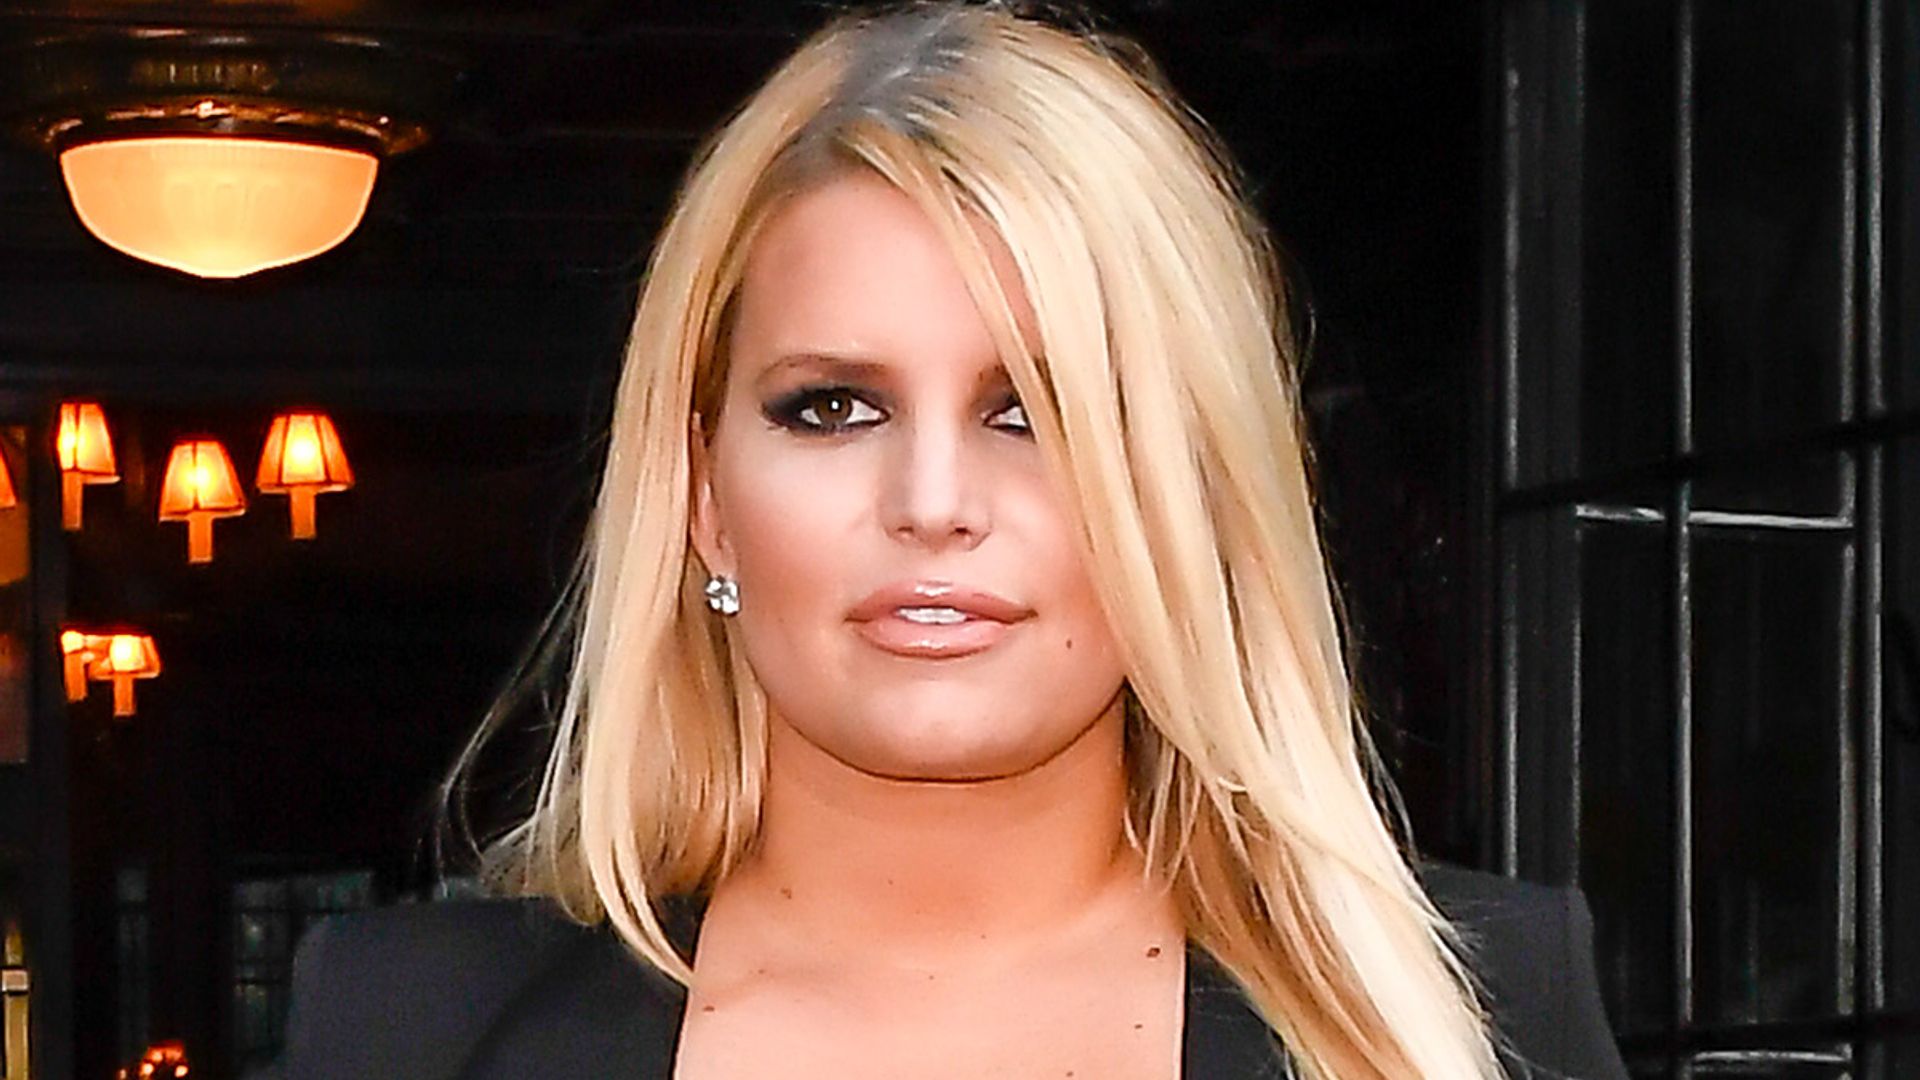 Jessica Simpson looks healthy in new glamour photos after fans